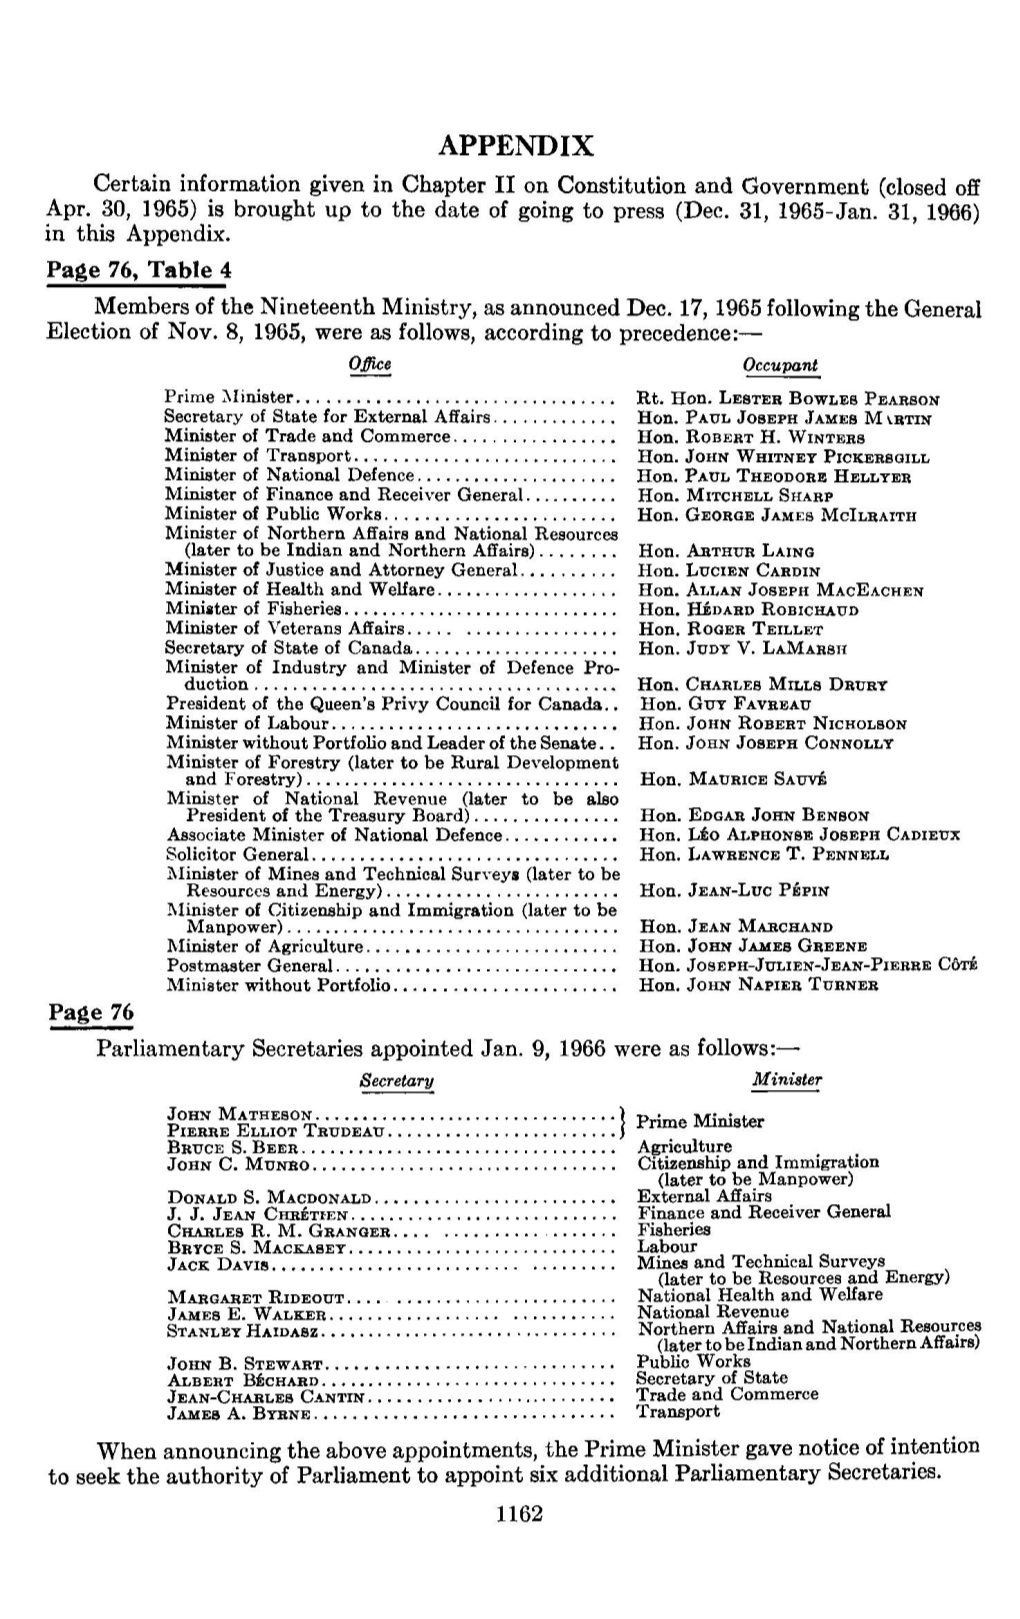 APPENDIX Certain Information Given in Chapter II on Constitution and Government (Closed Off Apr